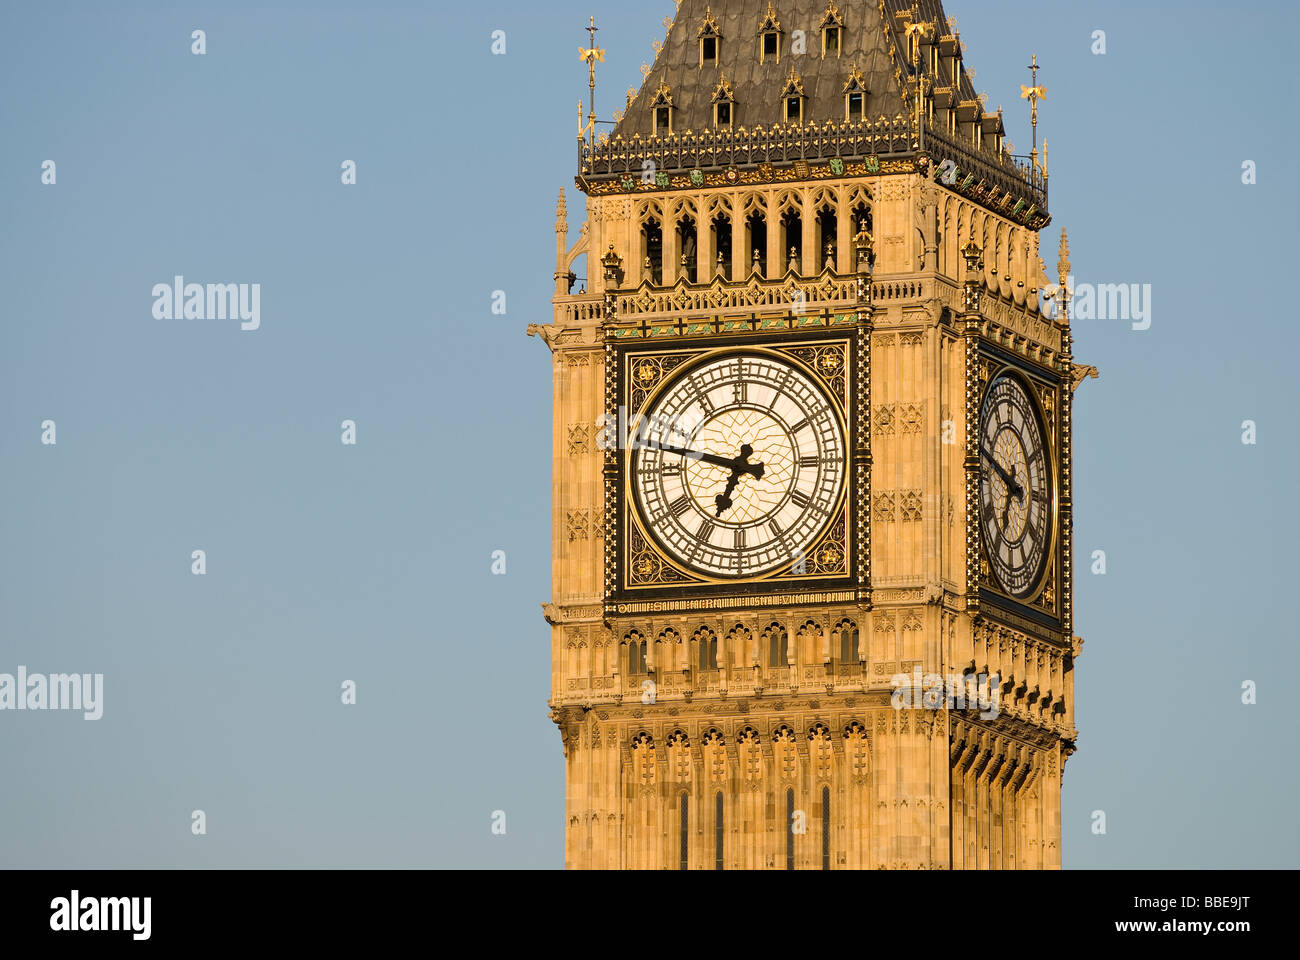 A close up view of the top section of the iconic London landmark Big Ben Stock Photo